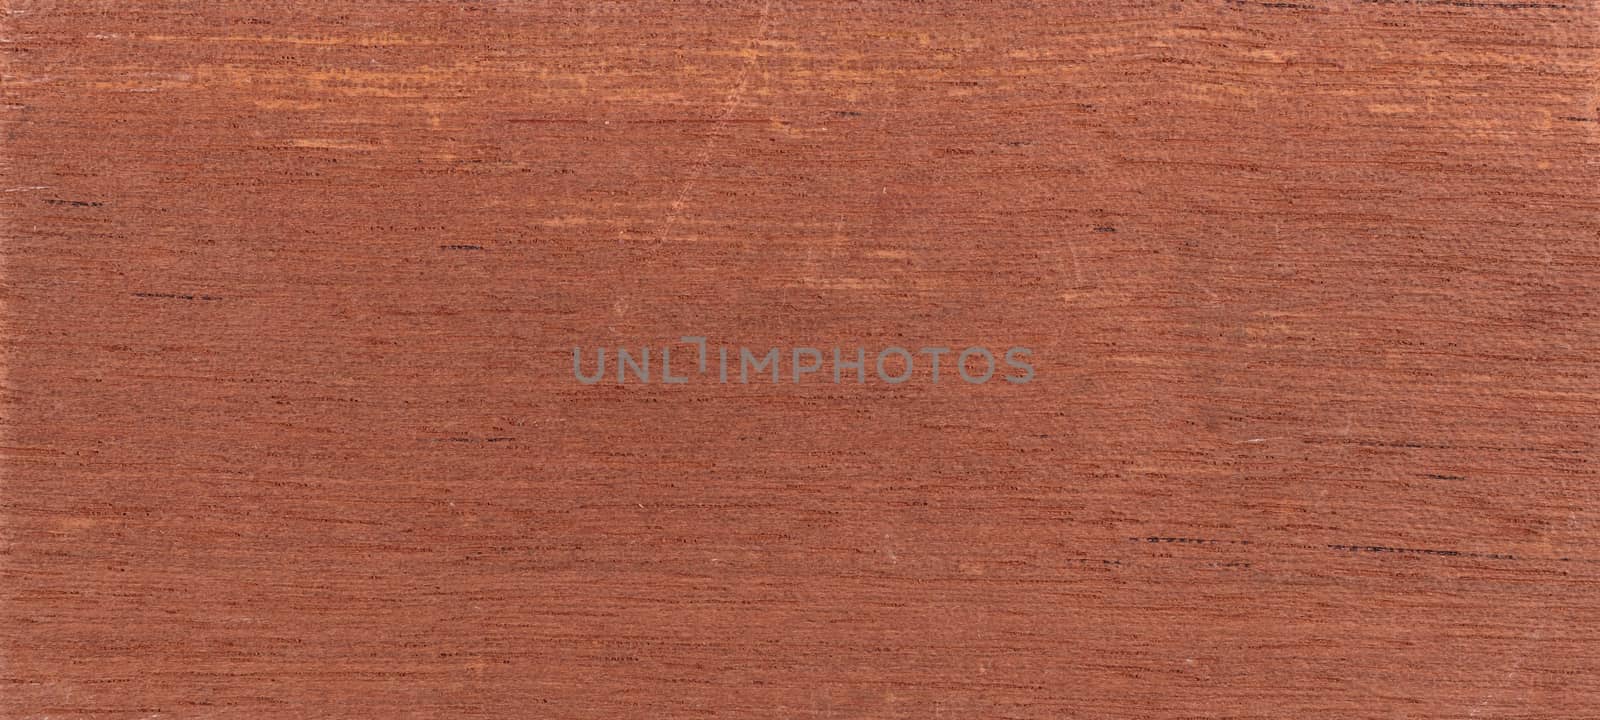 Wood from the tropical rainforest - Suriname - Cedrela odorata by michaklootwijk